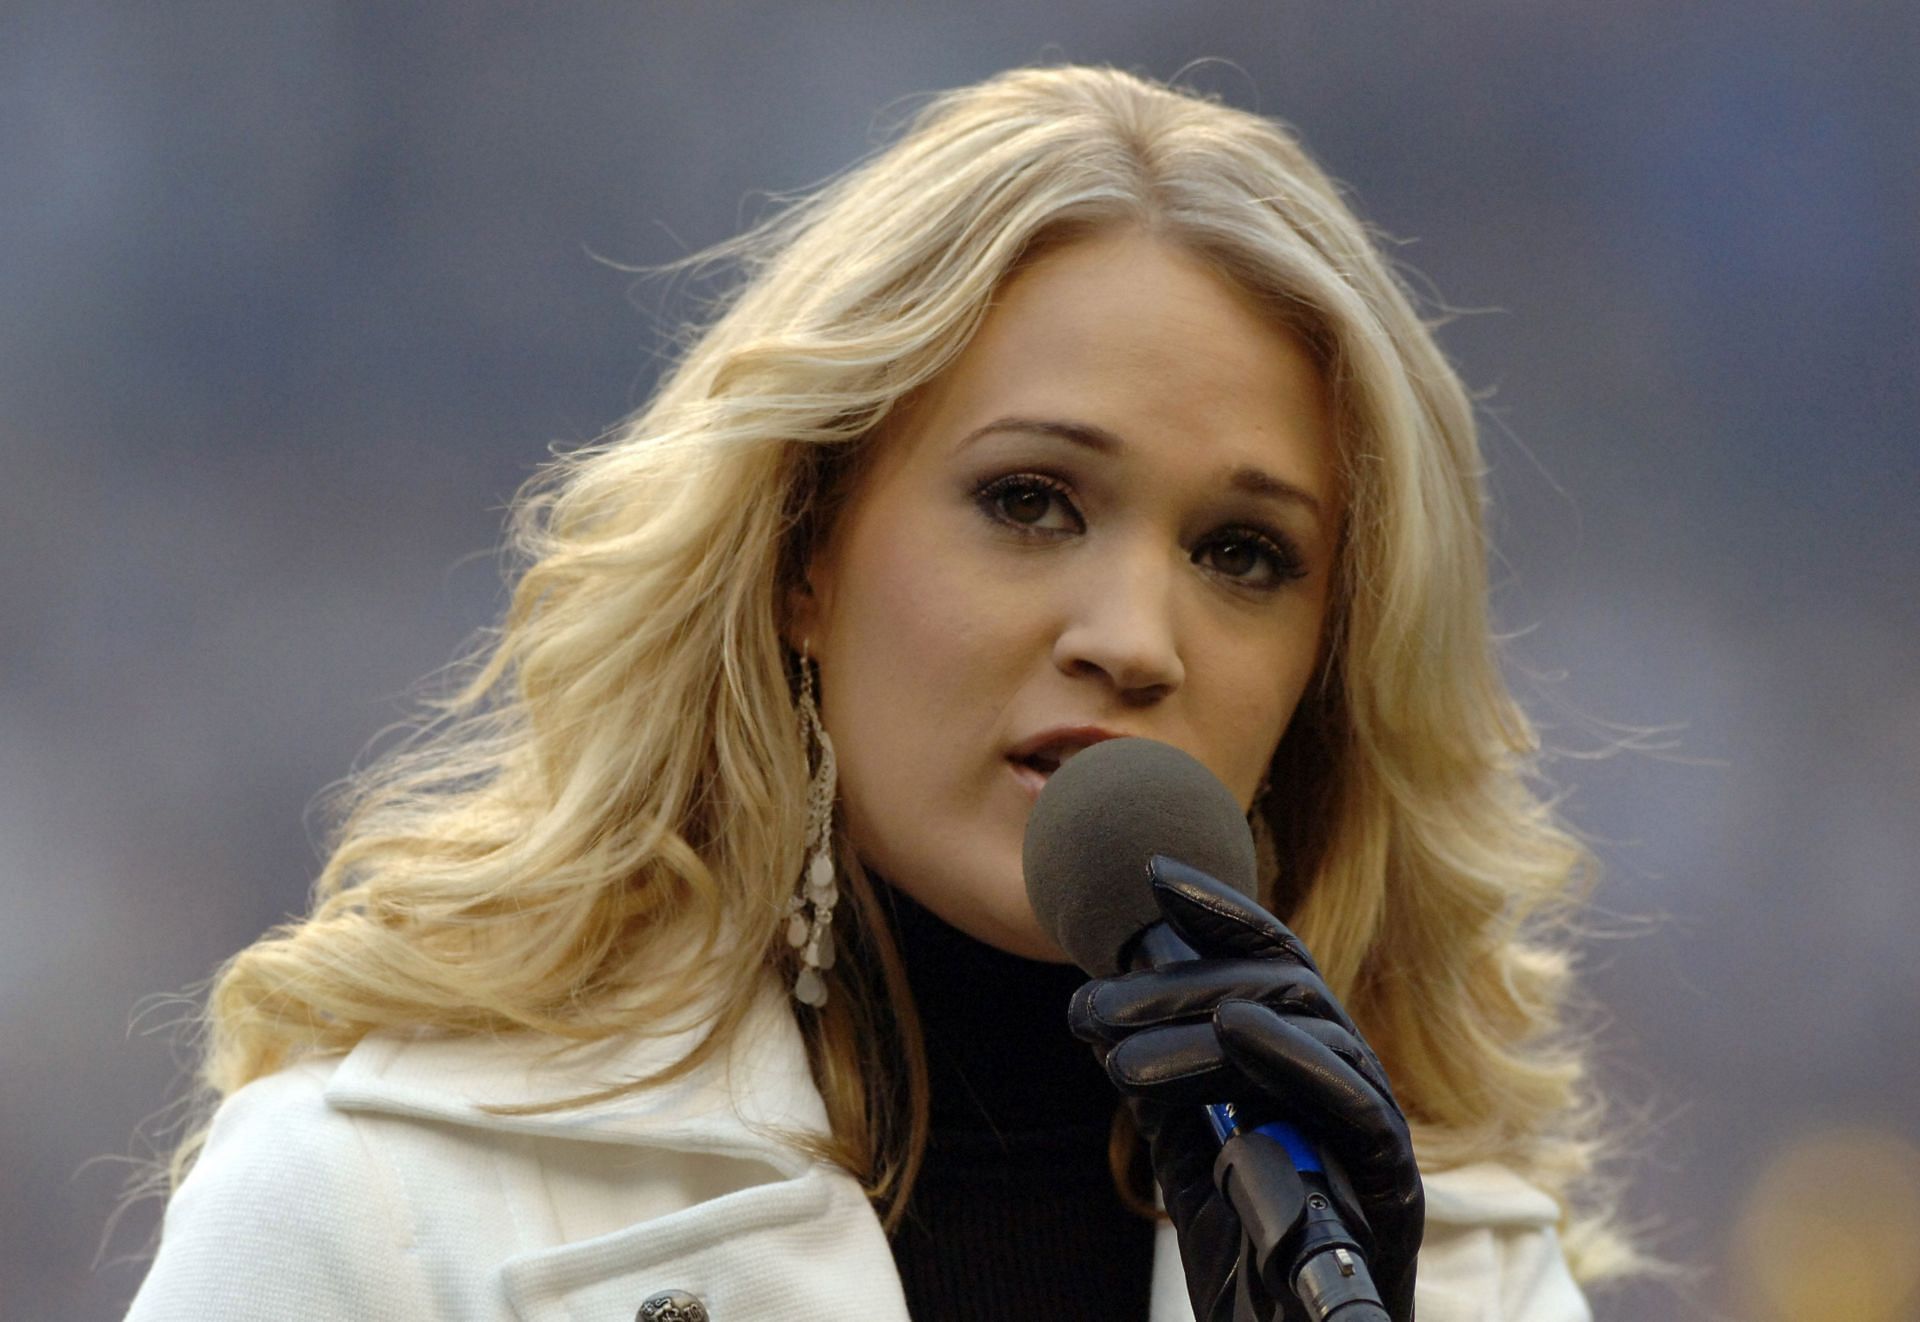 Carrie Underwood & Mike Fisher Tie The Knot, Carrie Underwood, Mike Fisher